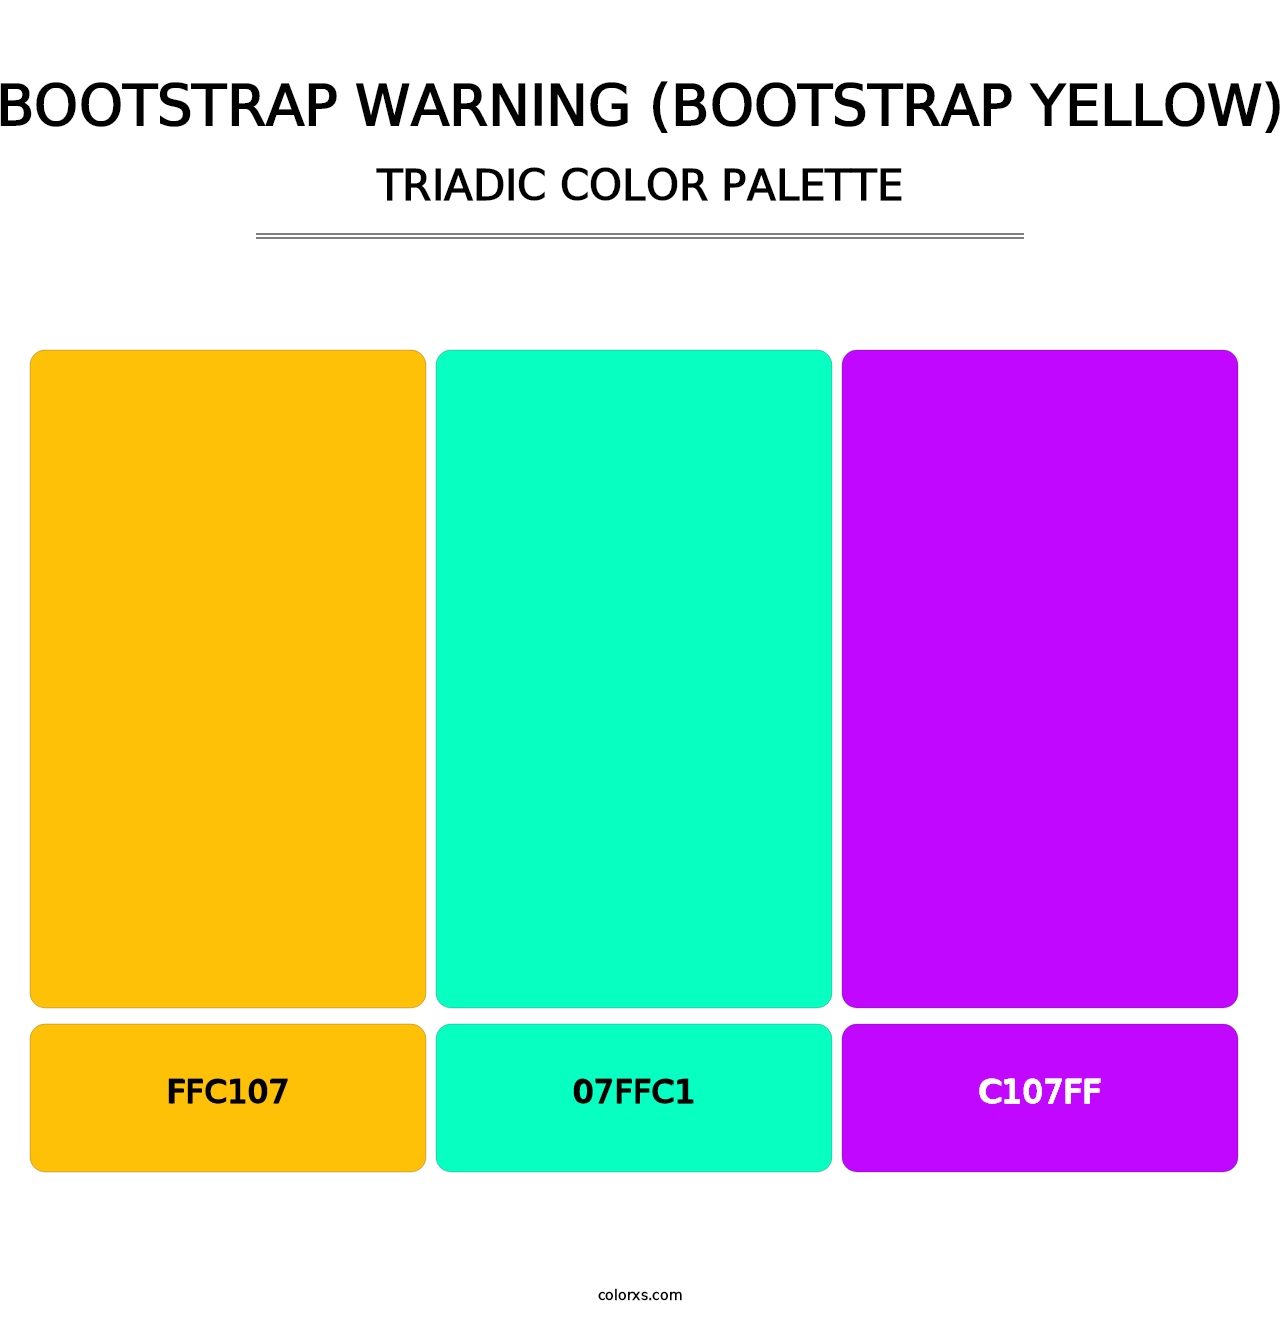 Bootstrap Warning (Bootstrap Yellow) - Triadic Color Palette